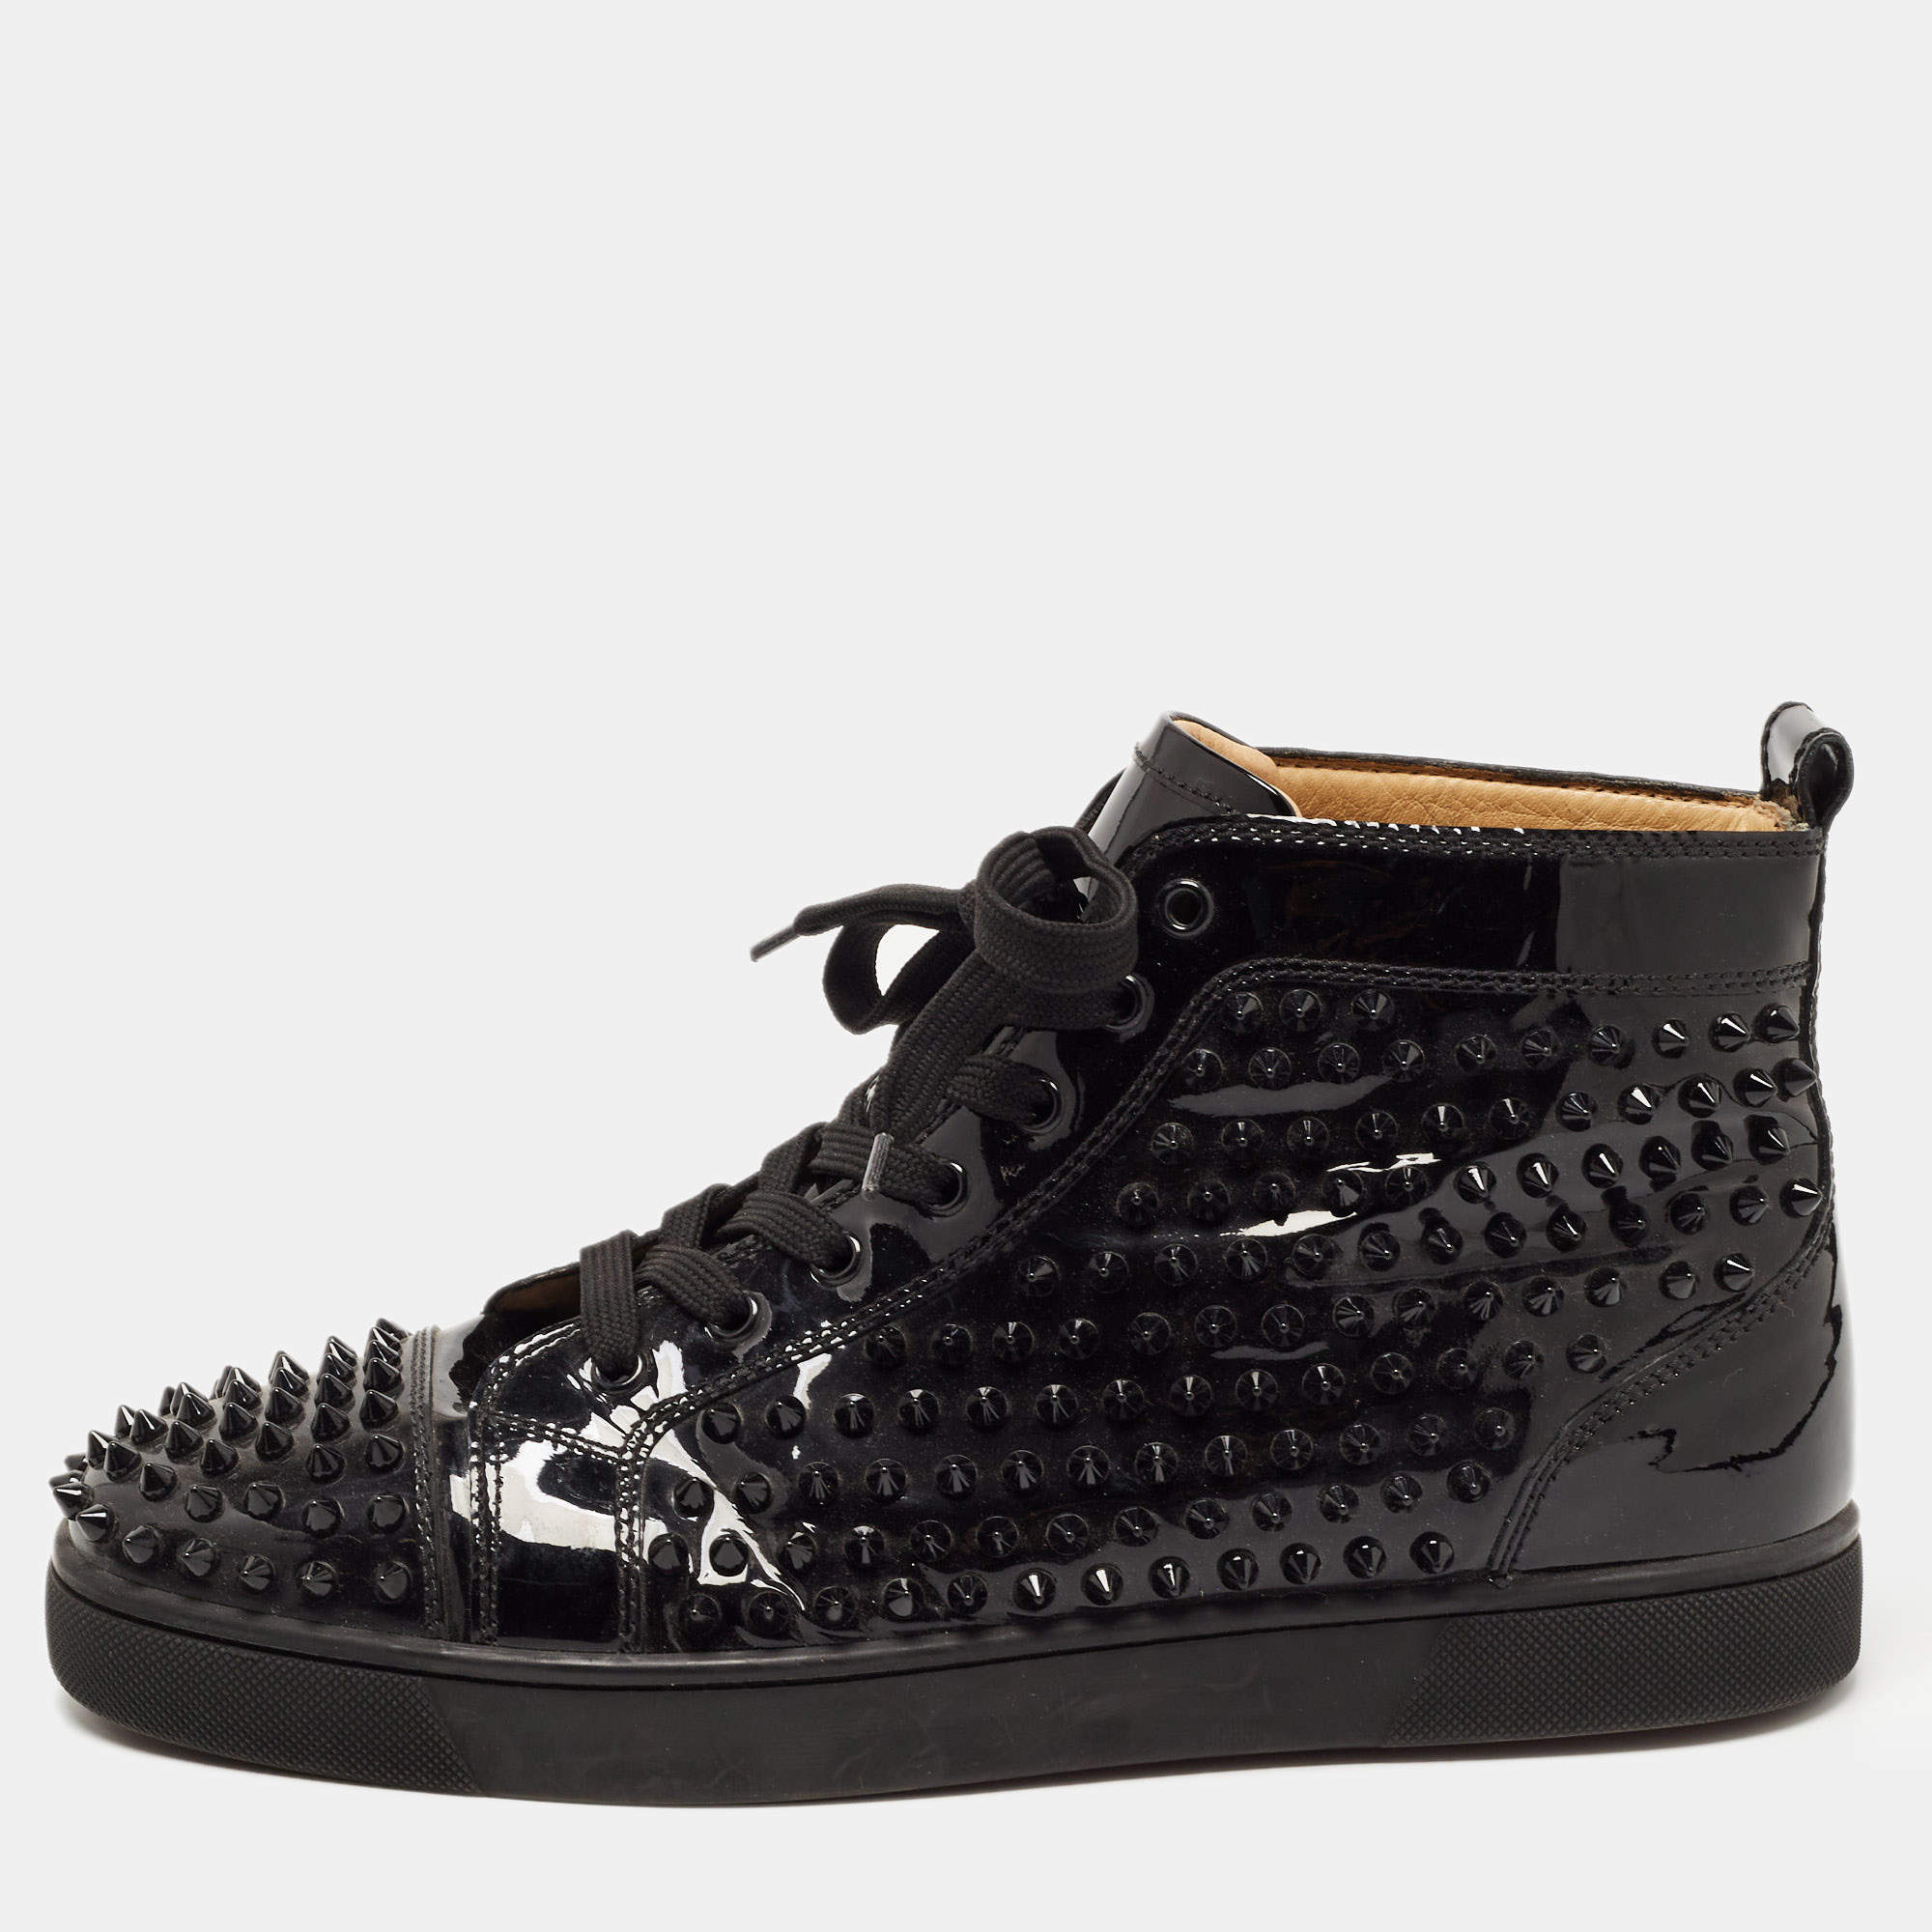 Louboutin Black Patent Leather Louis Spikes High Top Sneakers Size Christian Louboutin |